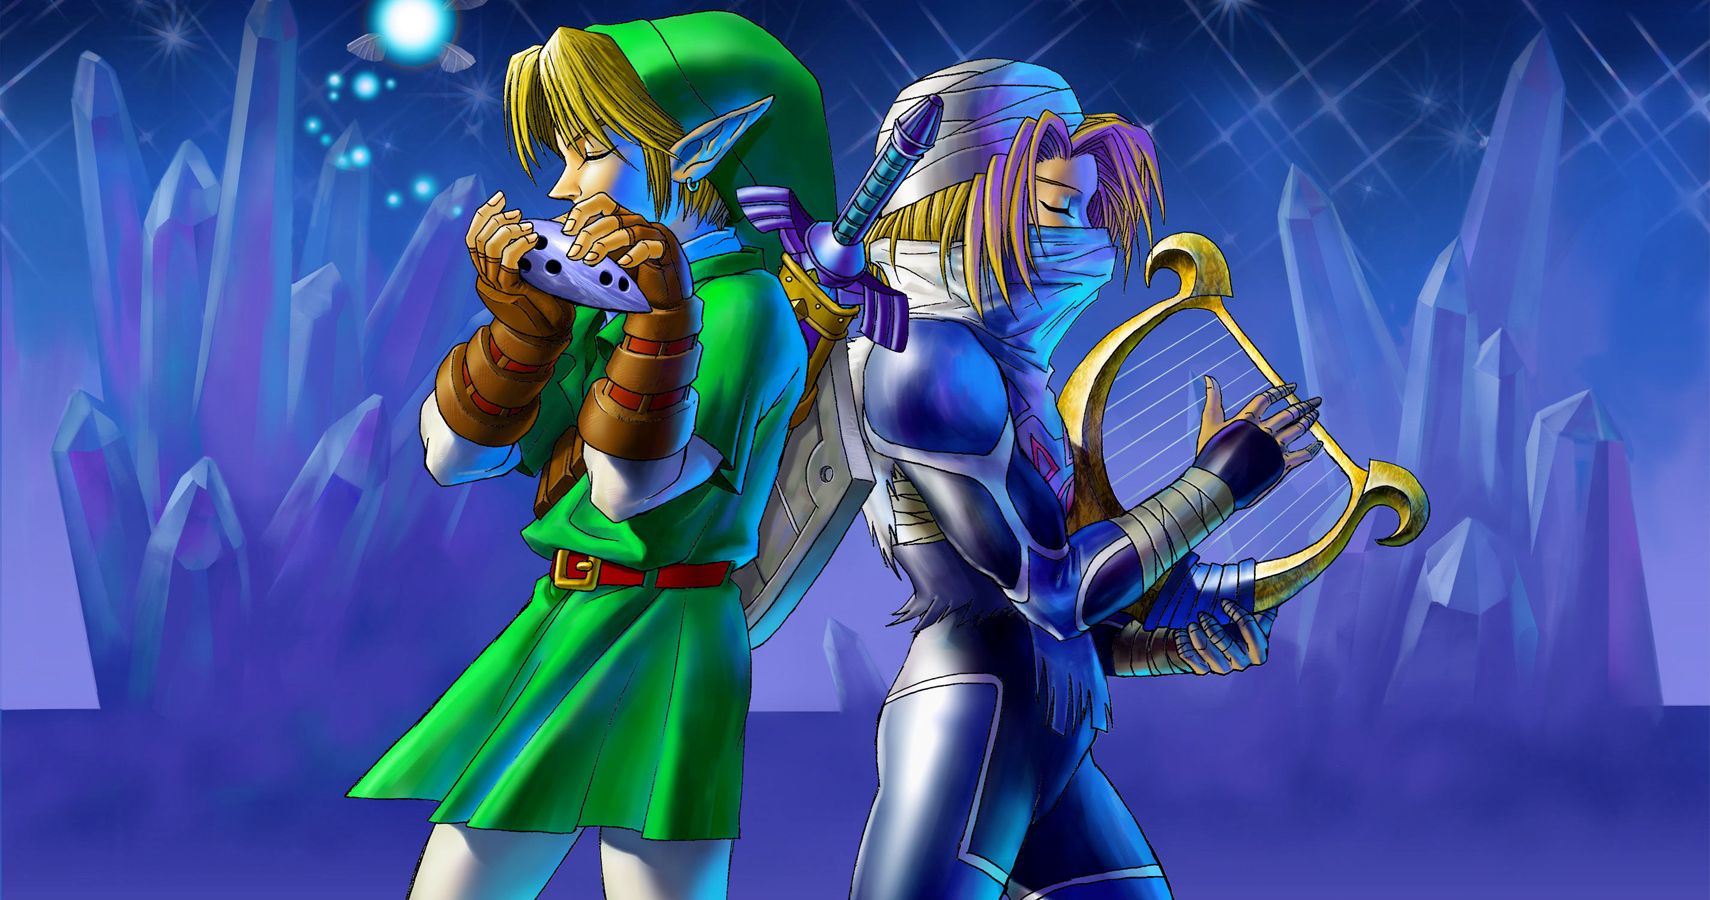 UberFacts @UberFacts The Legend Of Zelda: Ocarina Of Time for the